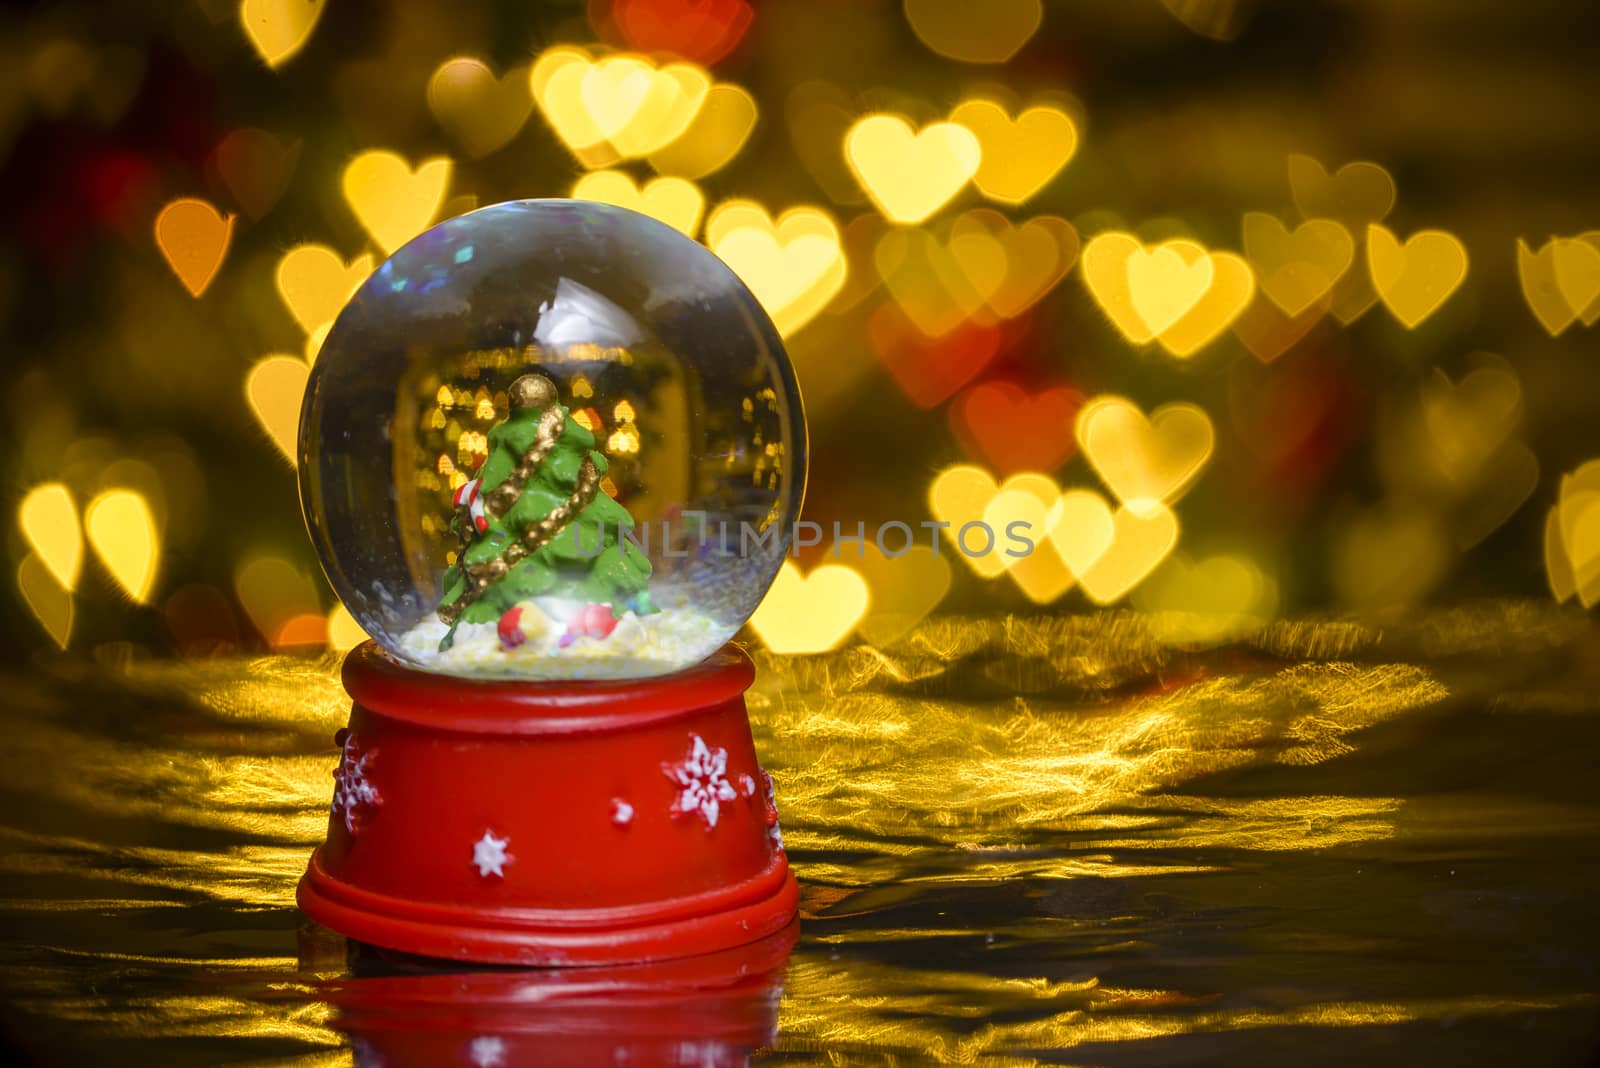 Christmas snow globe with xmas lights in background; decorated christmas tree; heart shapes bokeh blur